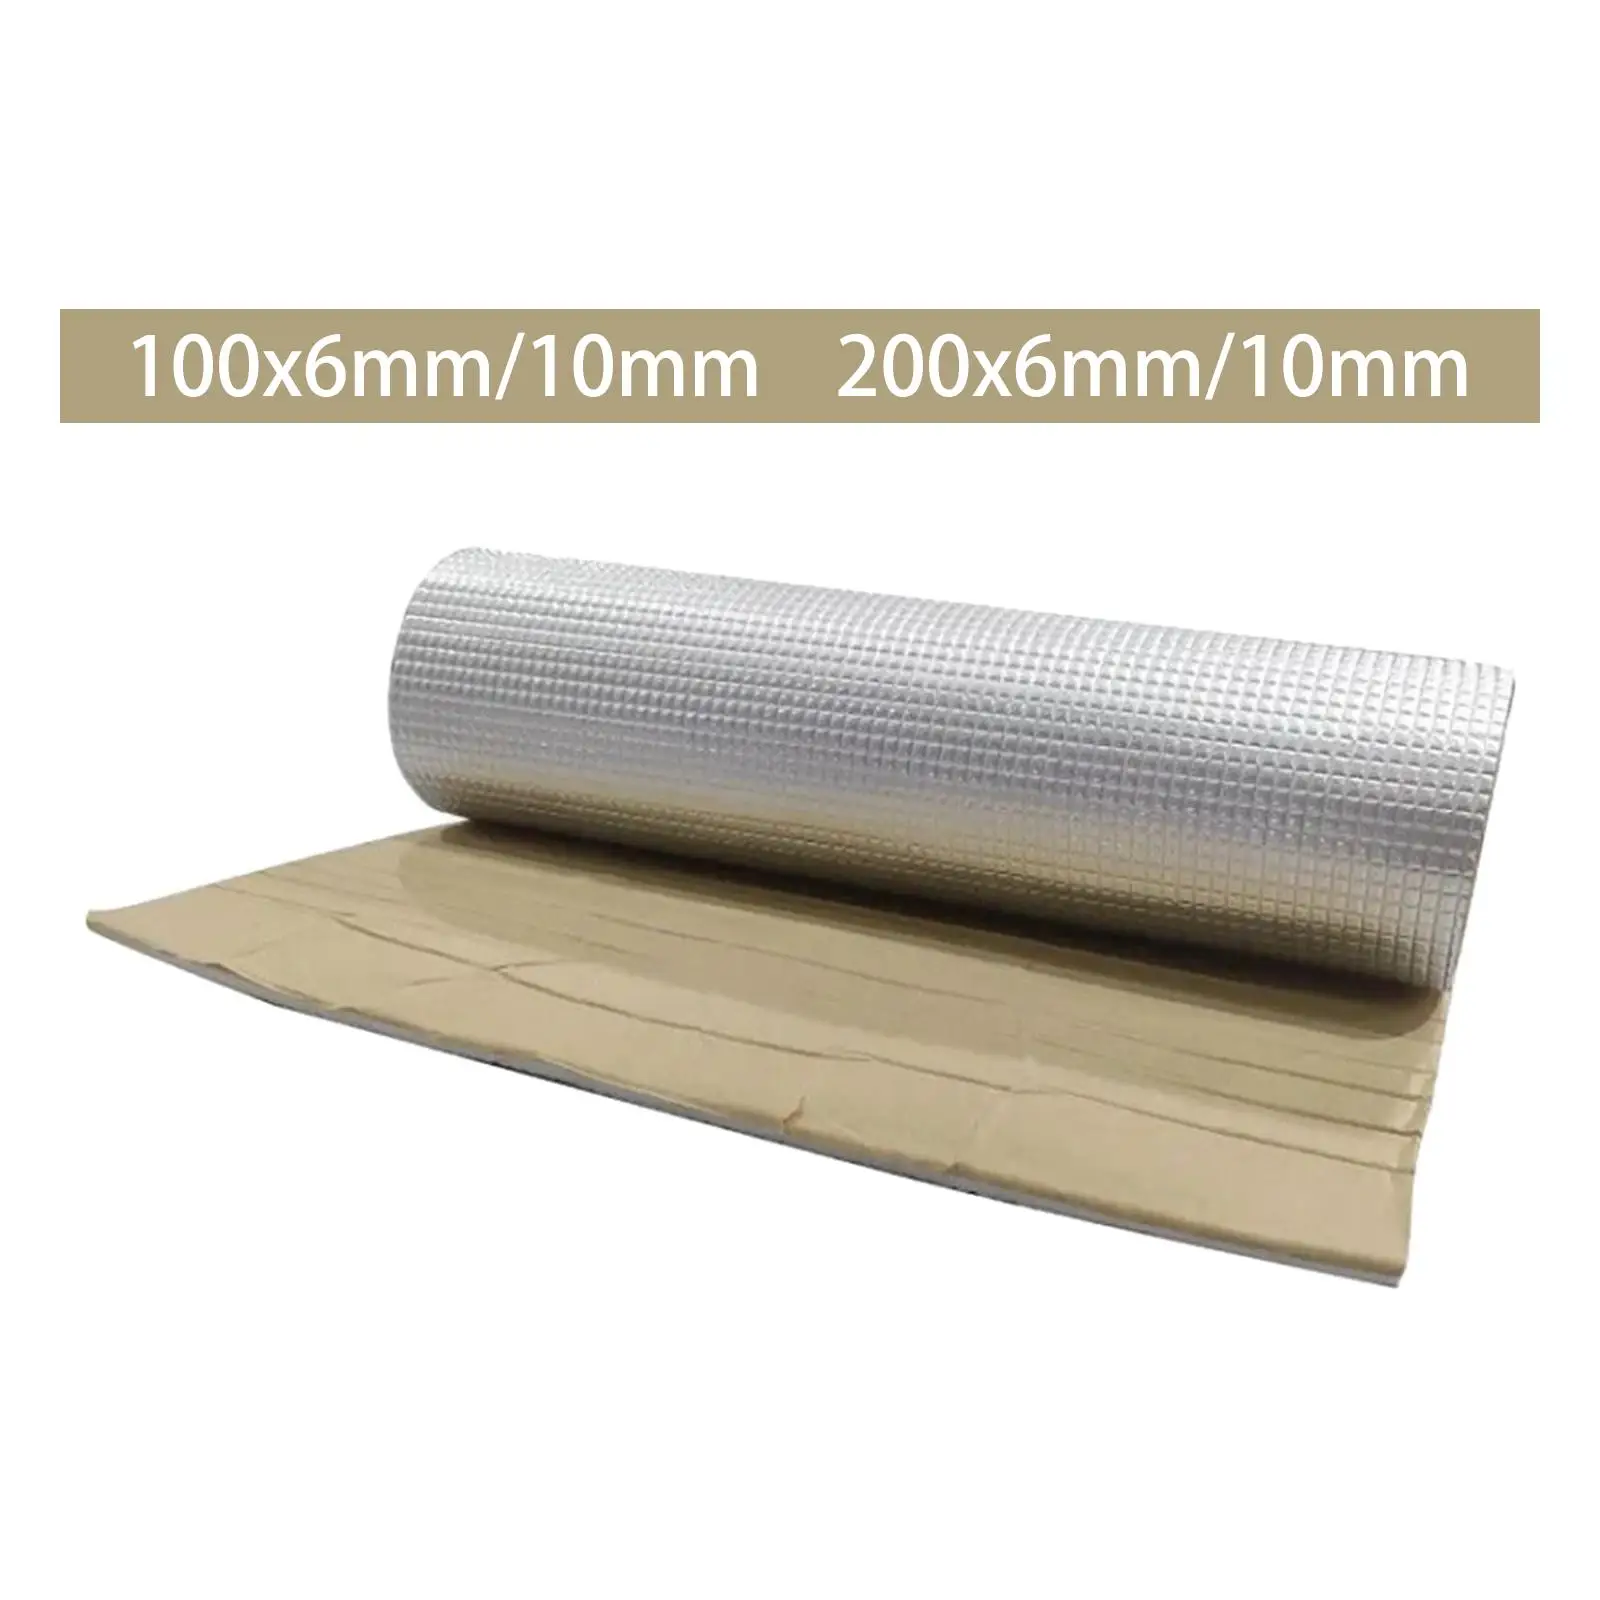 Audio Noise Insulation and Dampening Replacement Heat Sound Deadener